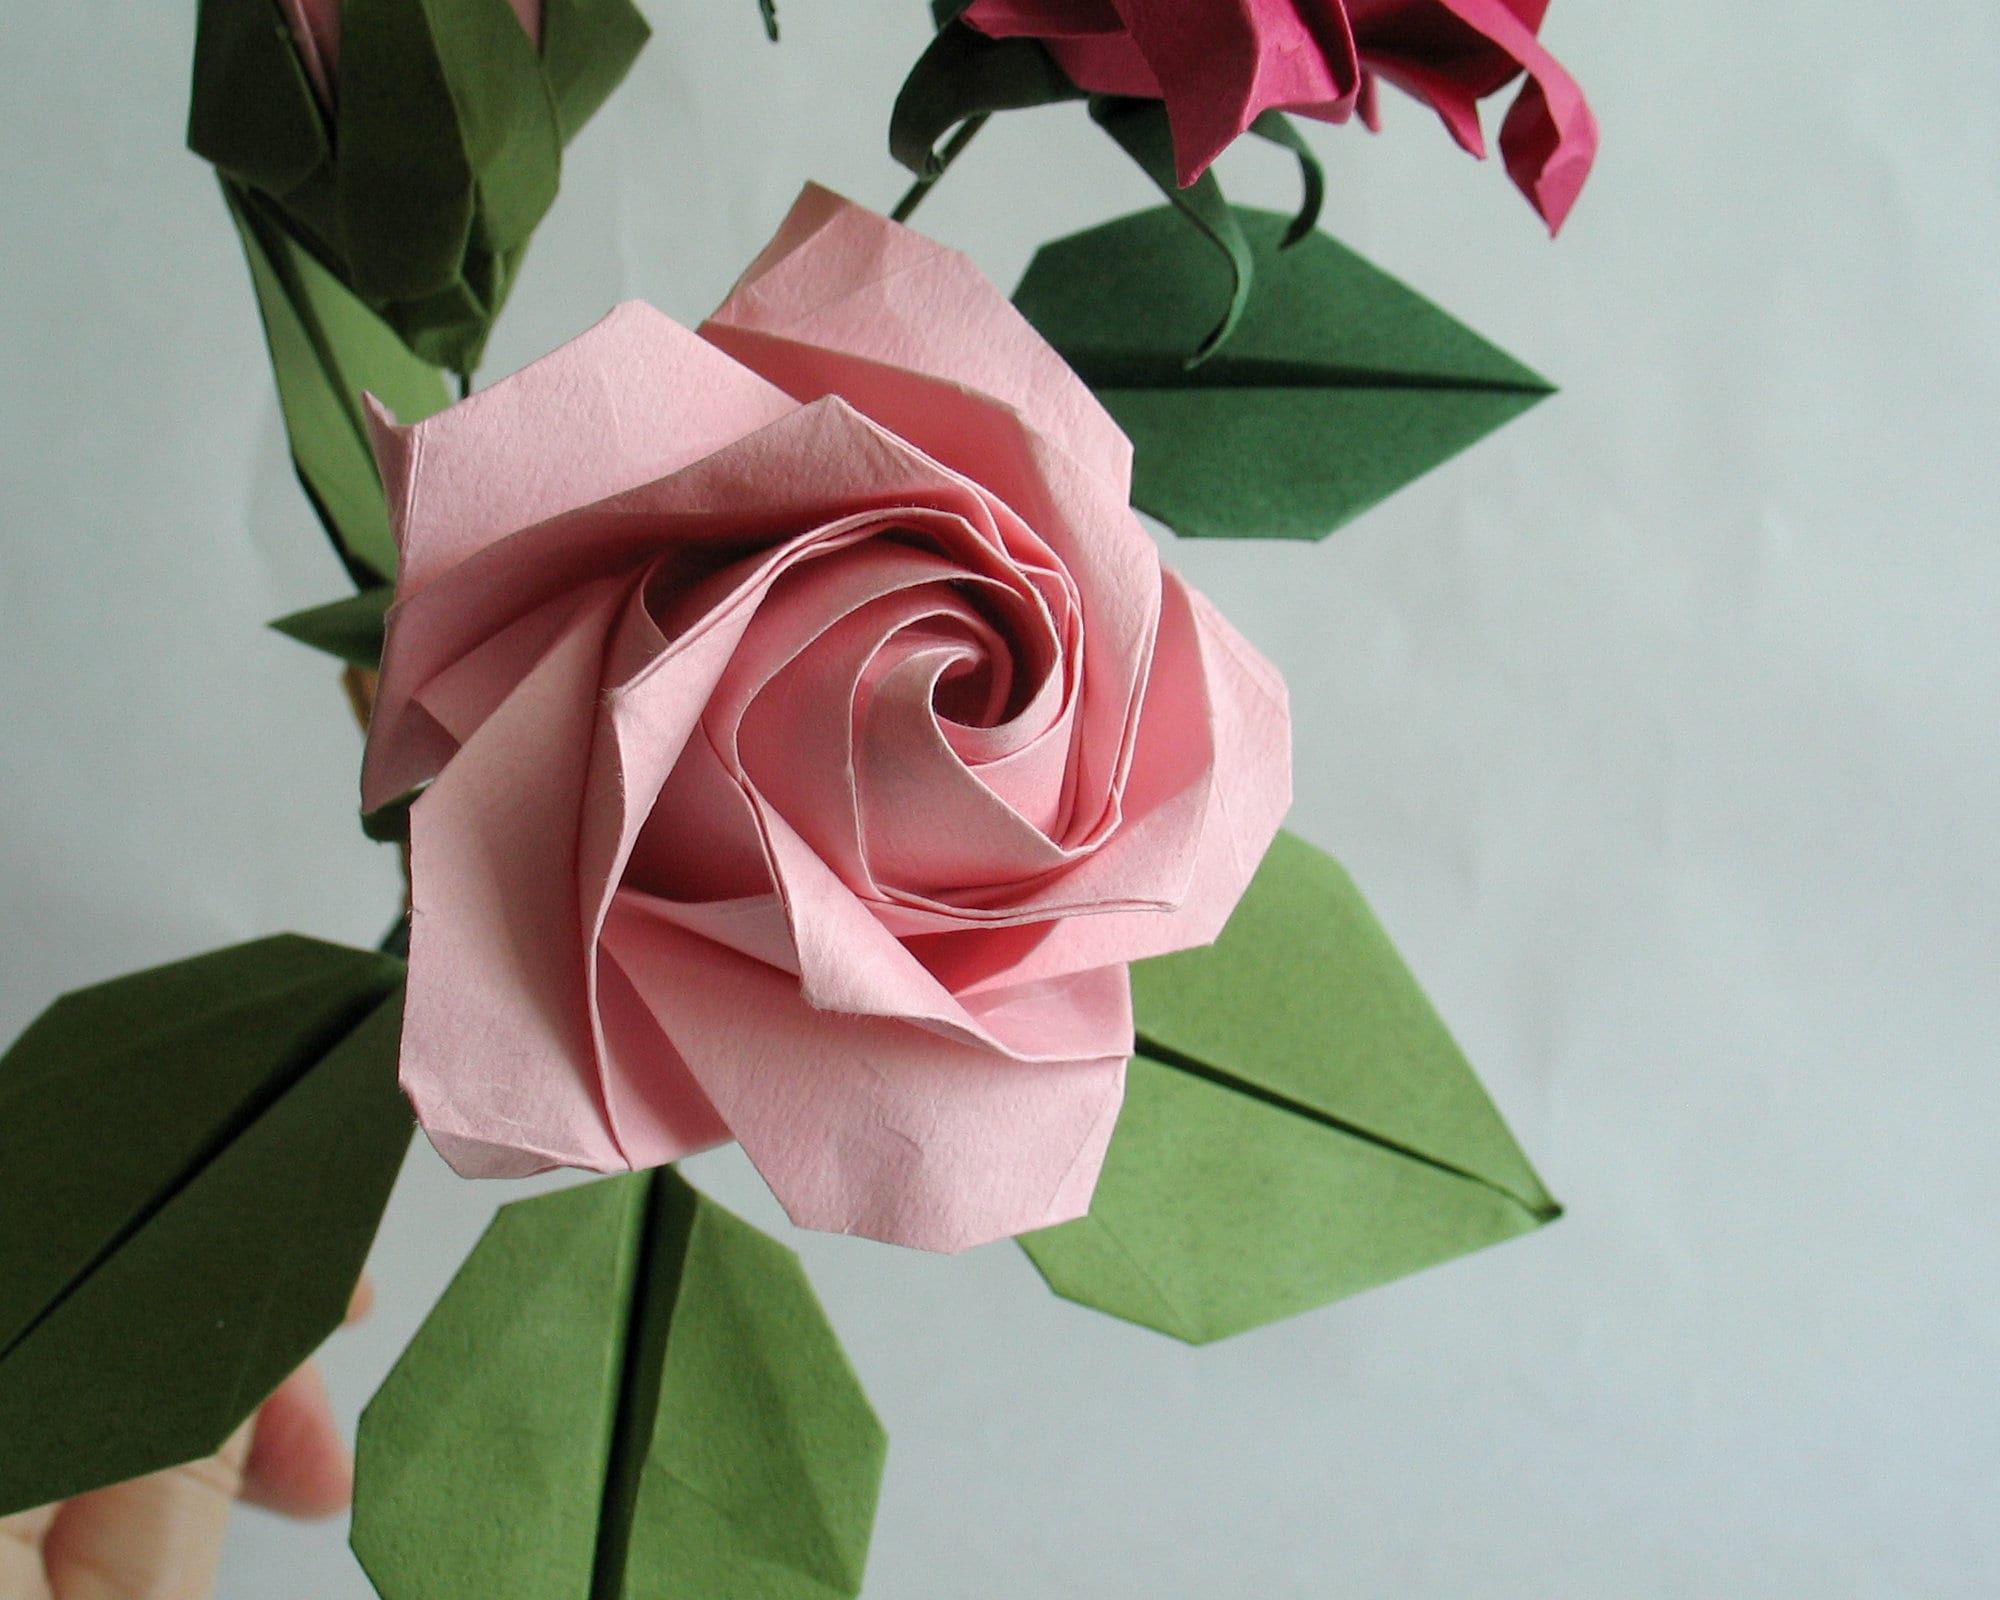 Pink Origami Rose, Magenta Paper Roses, Origami Rose Bouquet, Origami  Decoration, Paper Flower Bouquet, Paper Anniversary, Wedding Flowers 